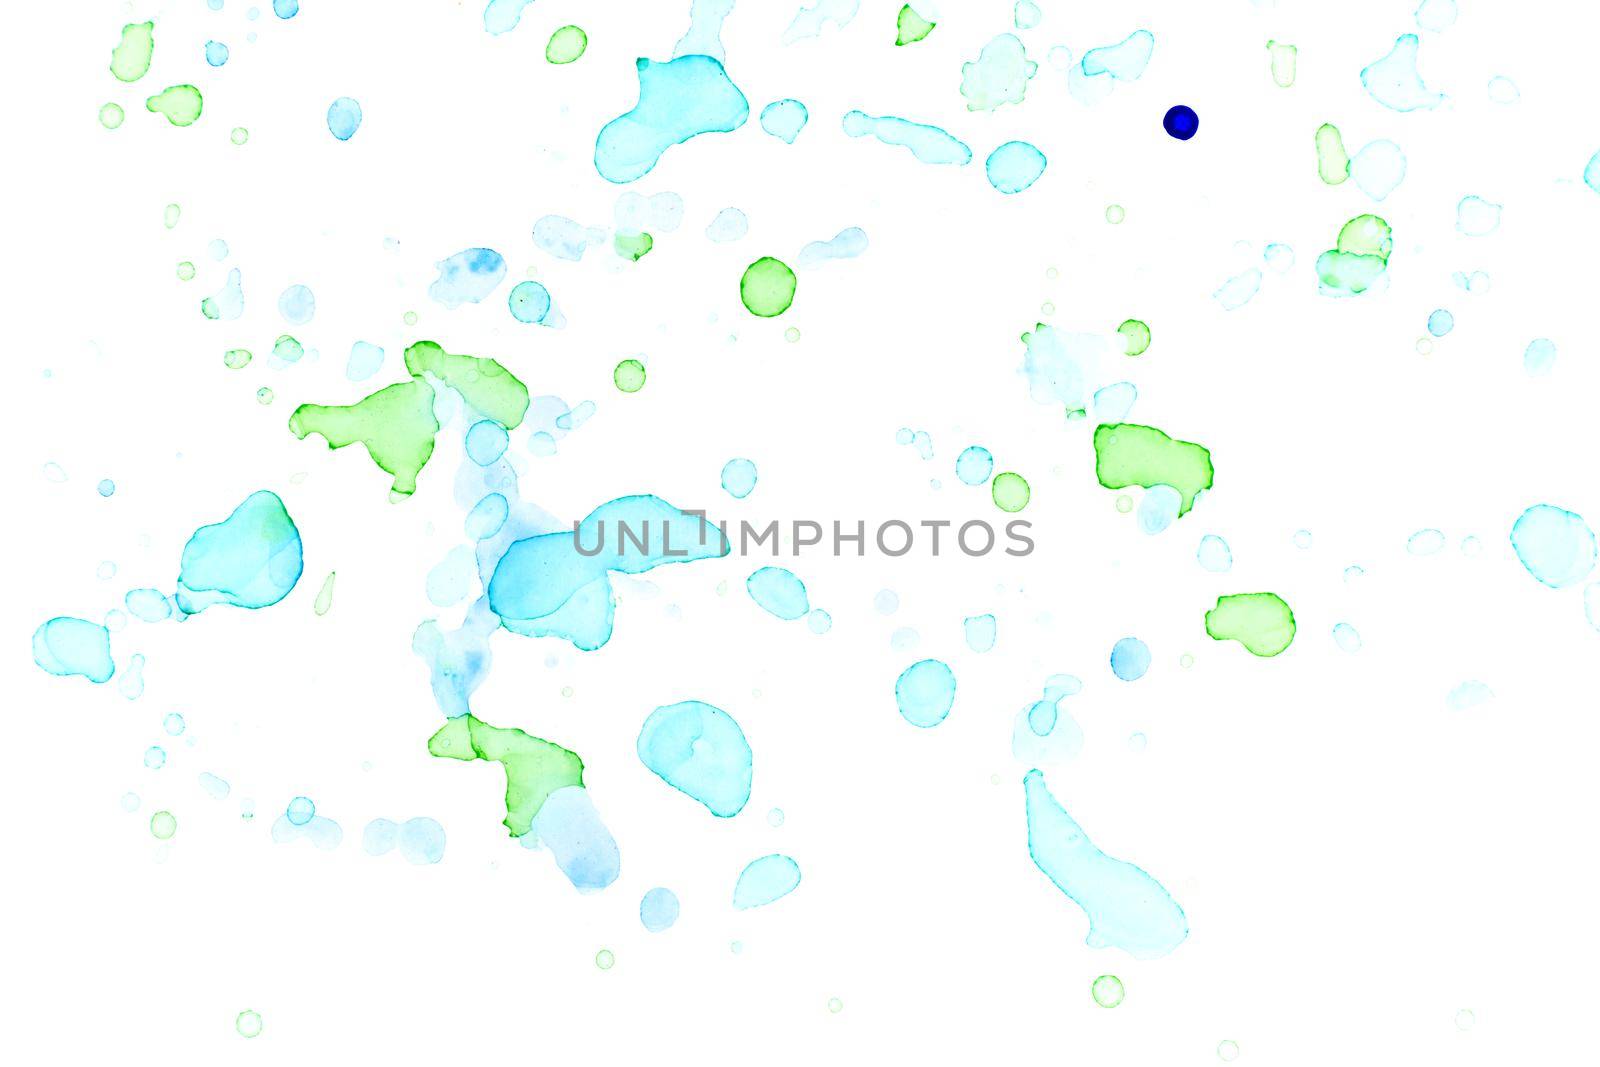 Abstract watercolor light blue and green drops and blobs background